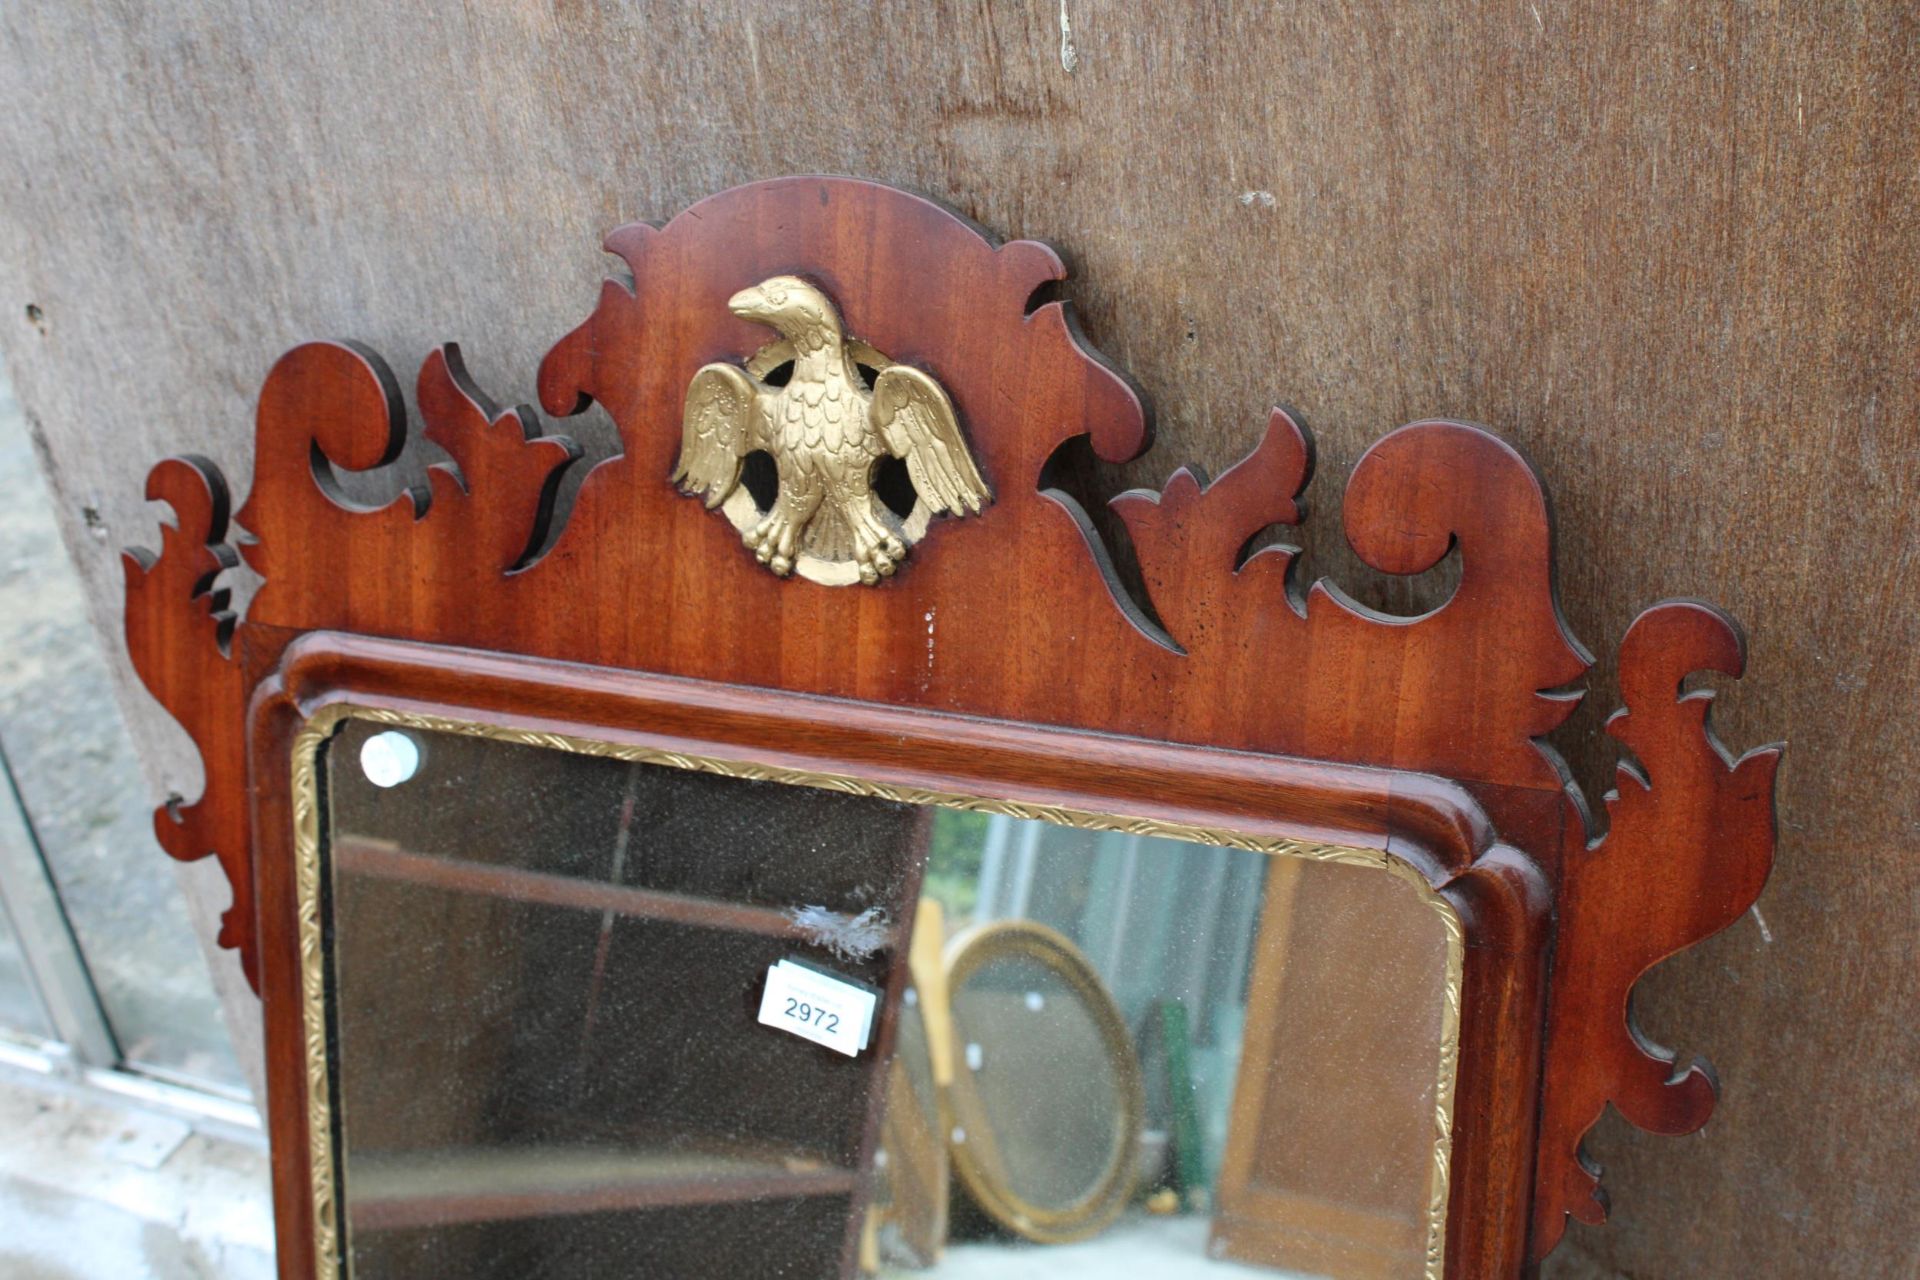 A 19TH CENTURY STYLE MAHOGANY WALL MIRROR WITH GOLD COLOURED EAGLE CARVING 41" X 24" - Image 2 of 4